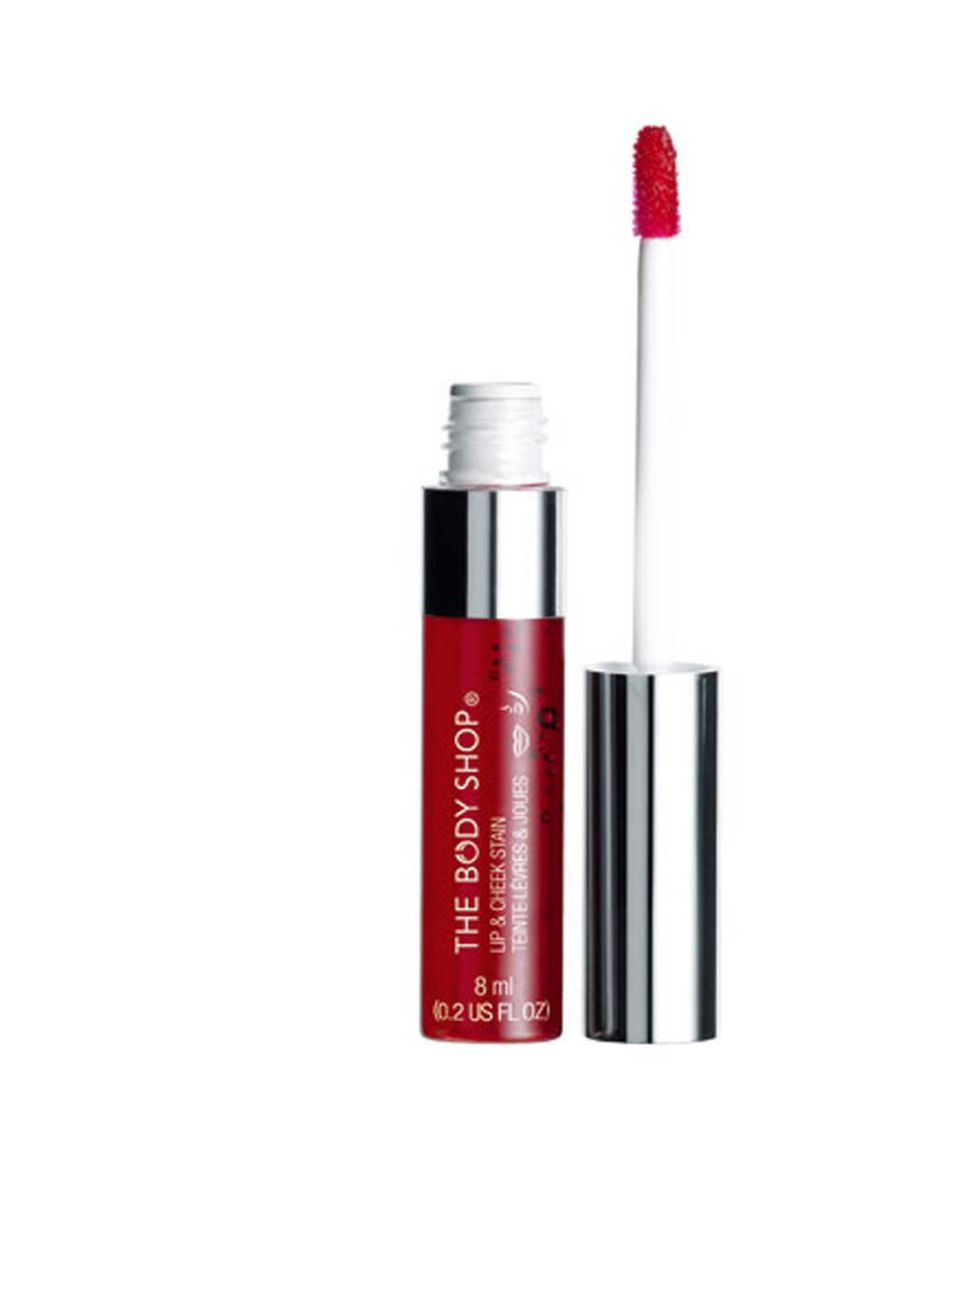 <p><strong>Elena Ostrowska</strong></p><p><strong> </strong><a href="http://www.thebodyshop.co.uk/make-up/lips/lip-and-cheek-stain.aspx">Body Shop Lip Tint, £10</a></p><p>This tint gave me a really nice, subtle colour that perked up my complexion and las